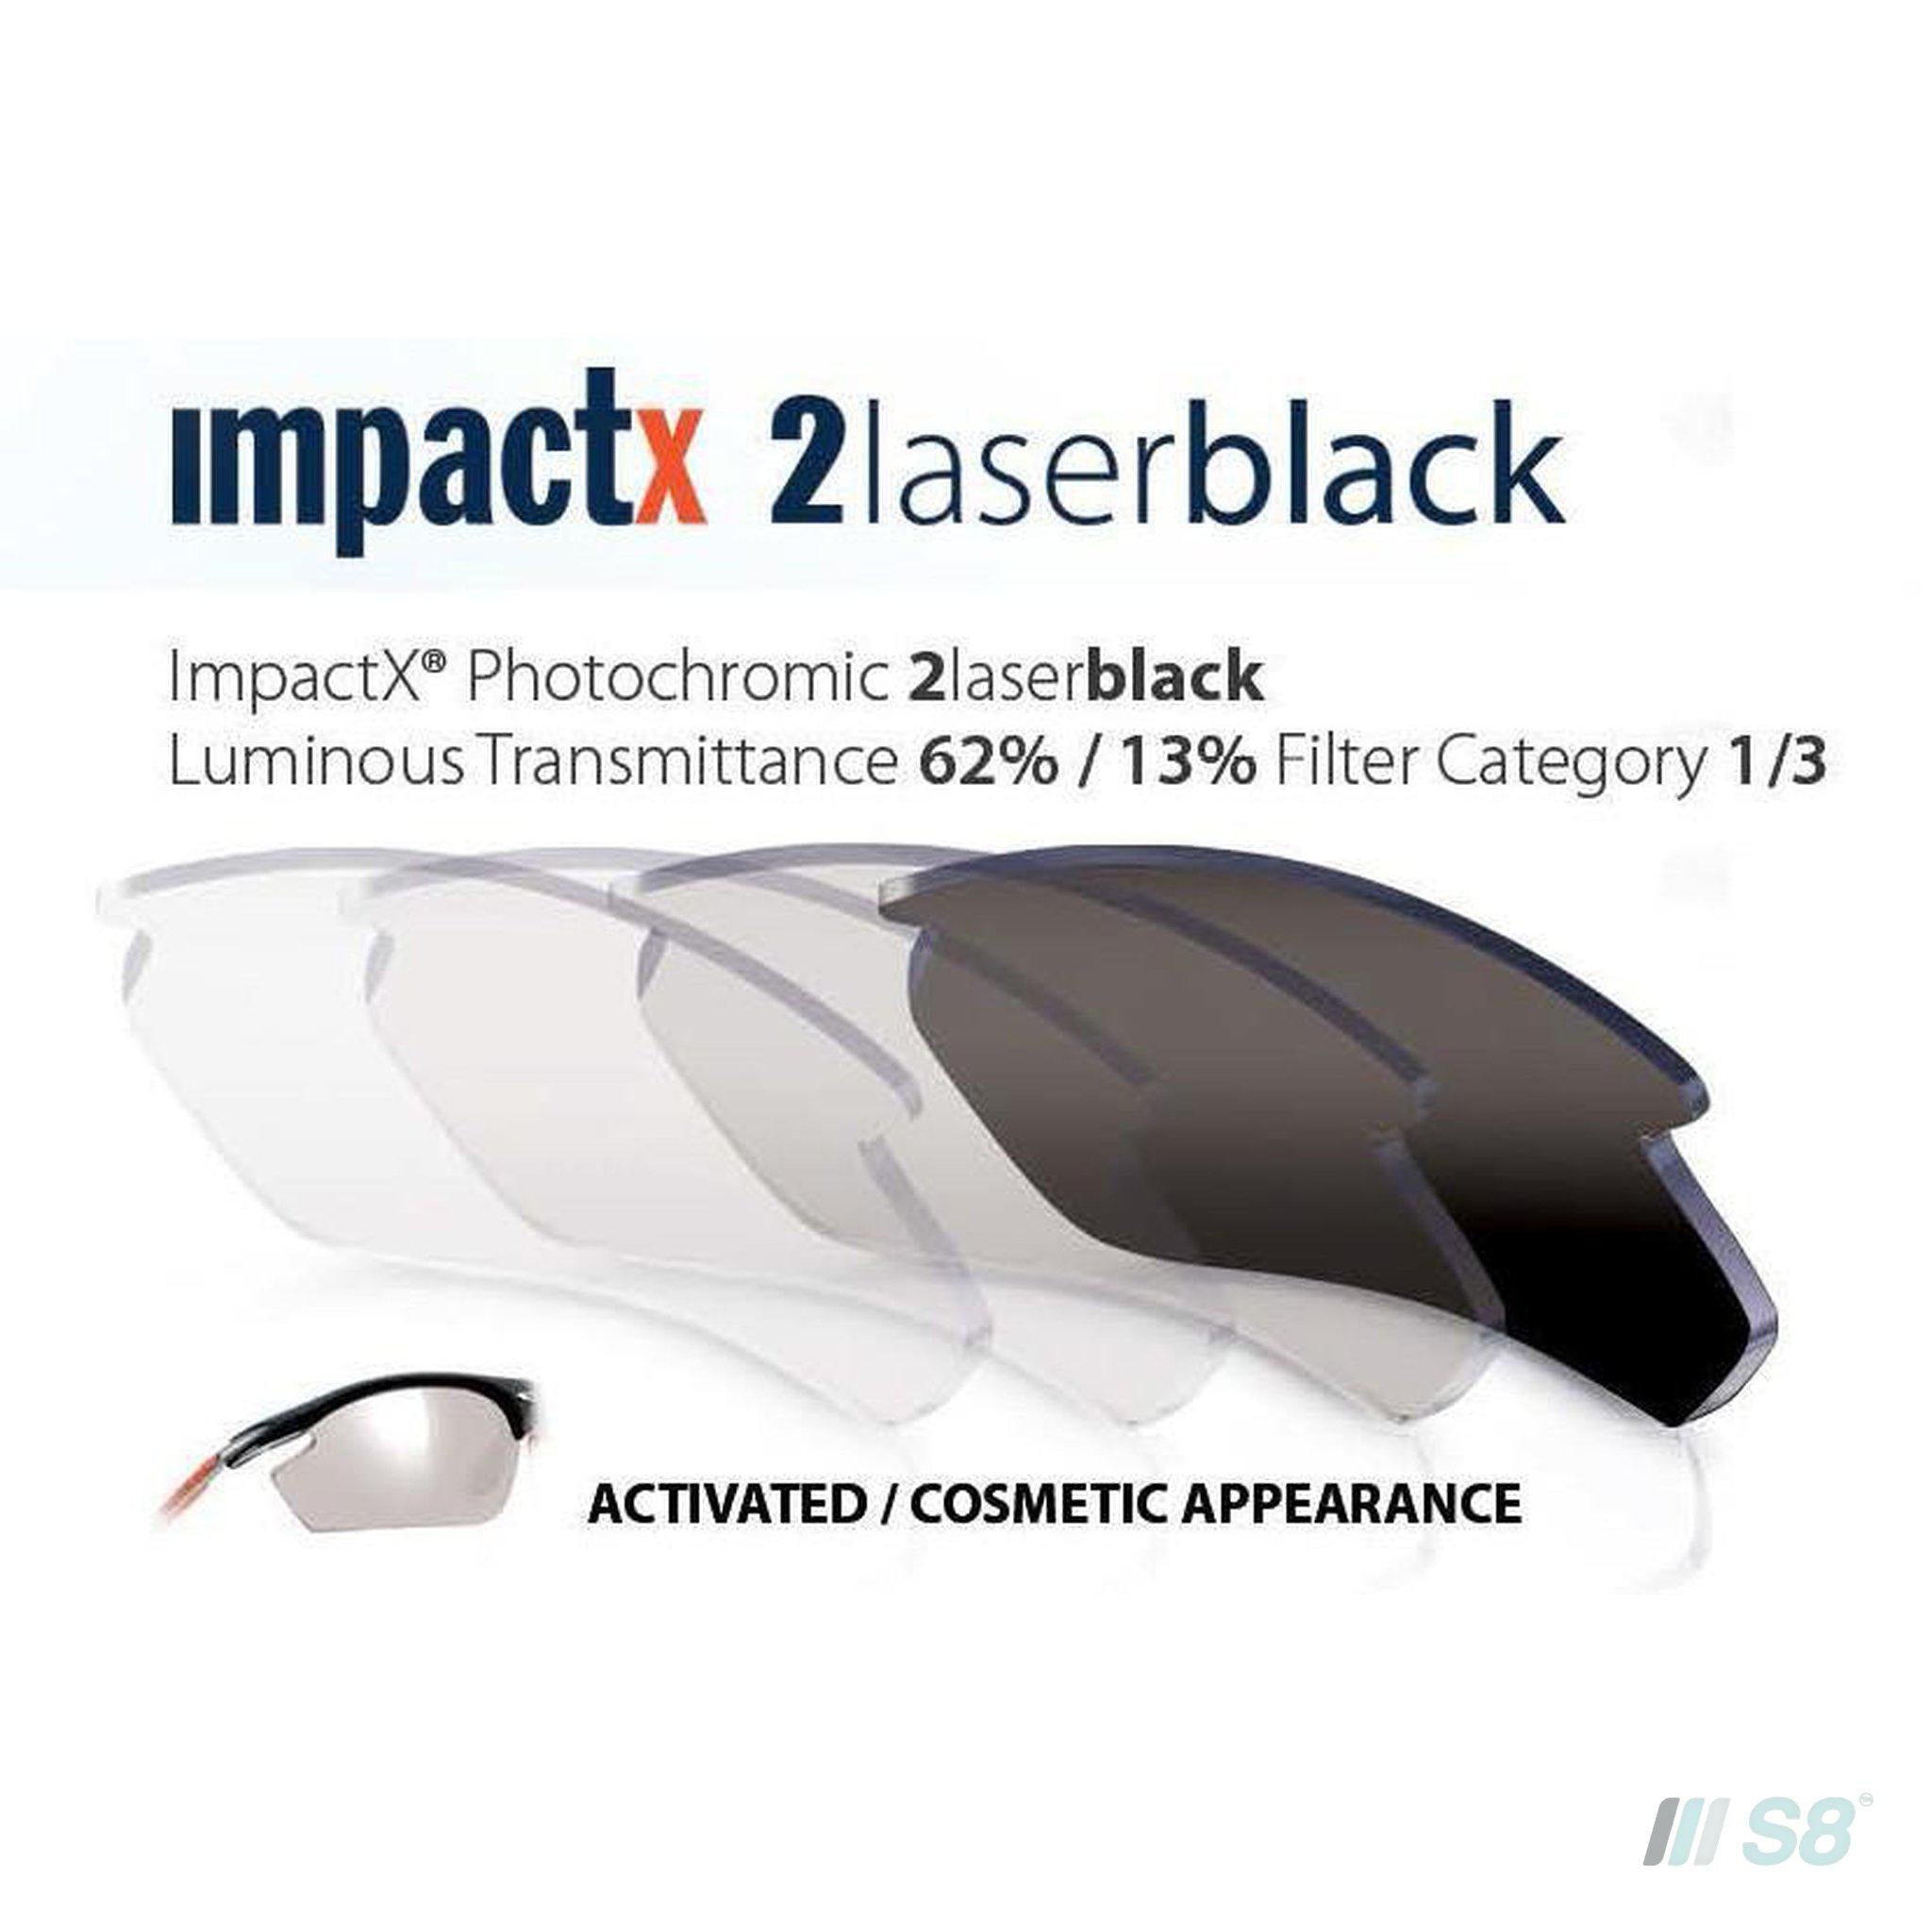 Rudy Project - Tralyx Sunglasses / Matte Black / Impactx 2 Photochromic Black lenses-Rudy Project-S8 Products Group